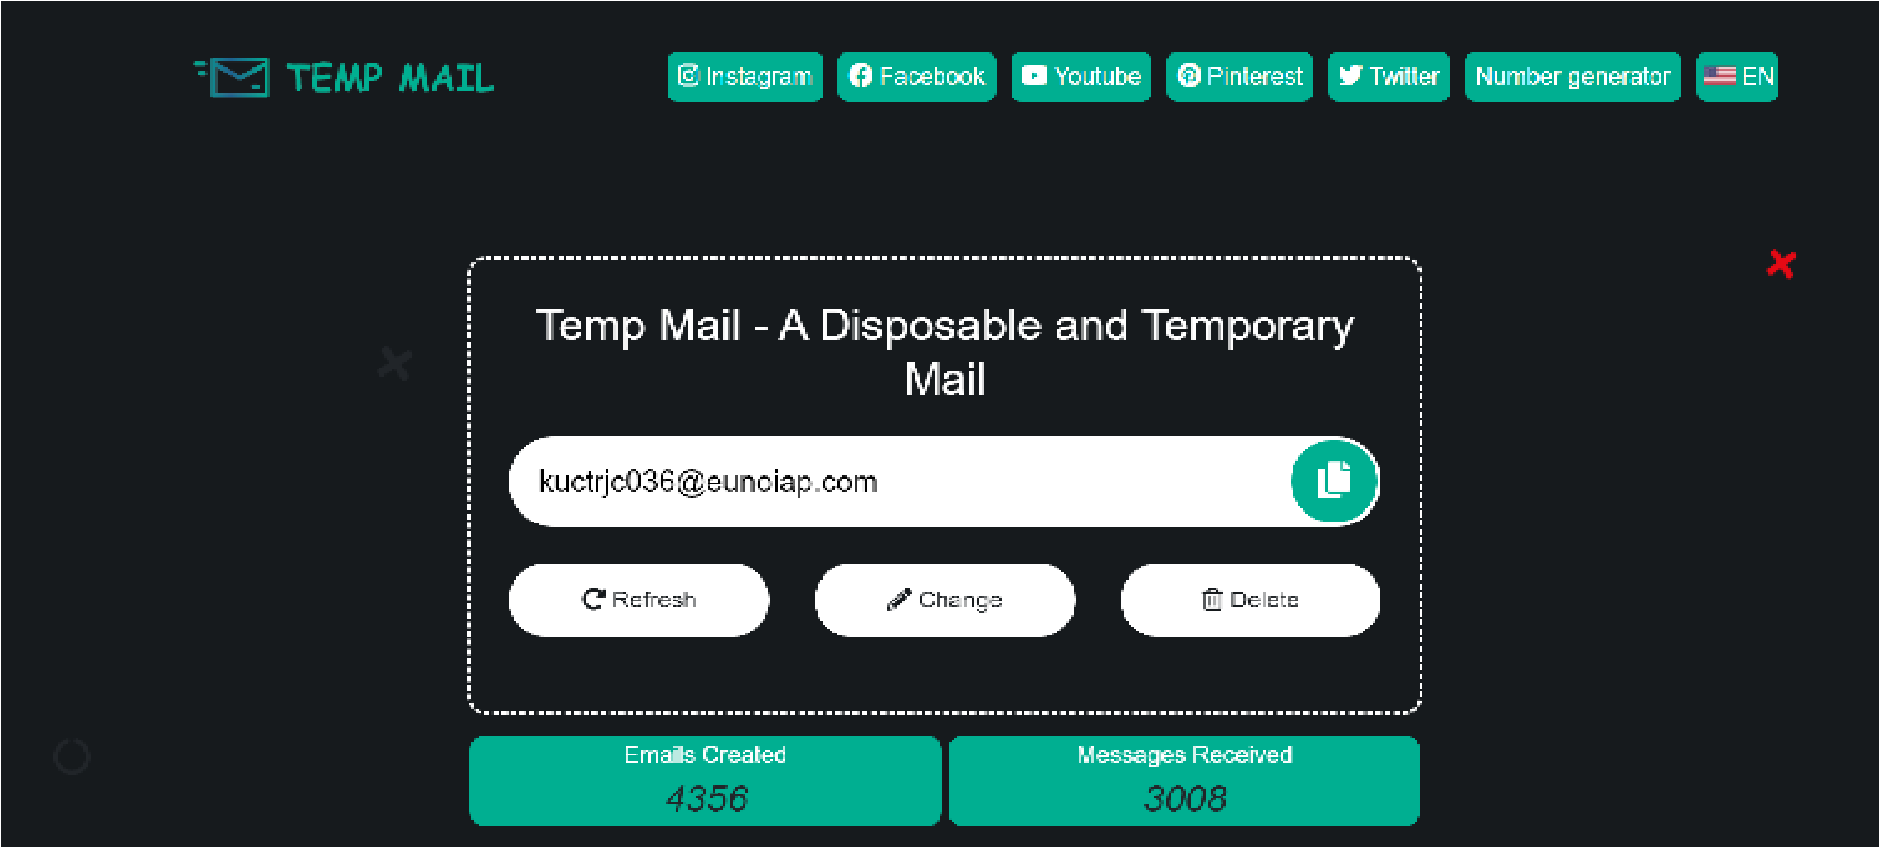 How to Recreate Old Temp Mail